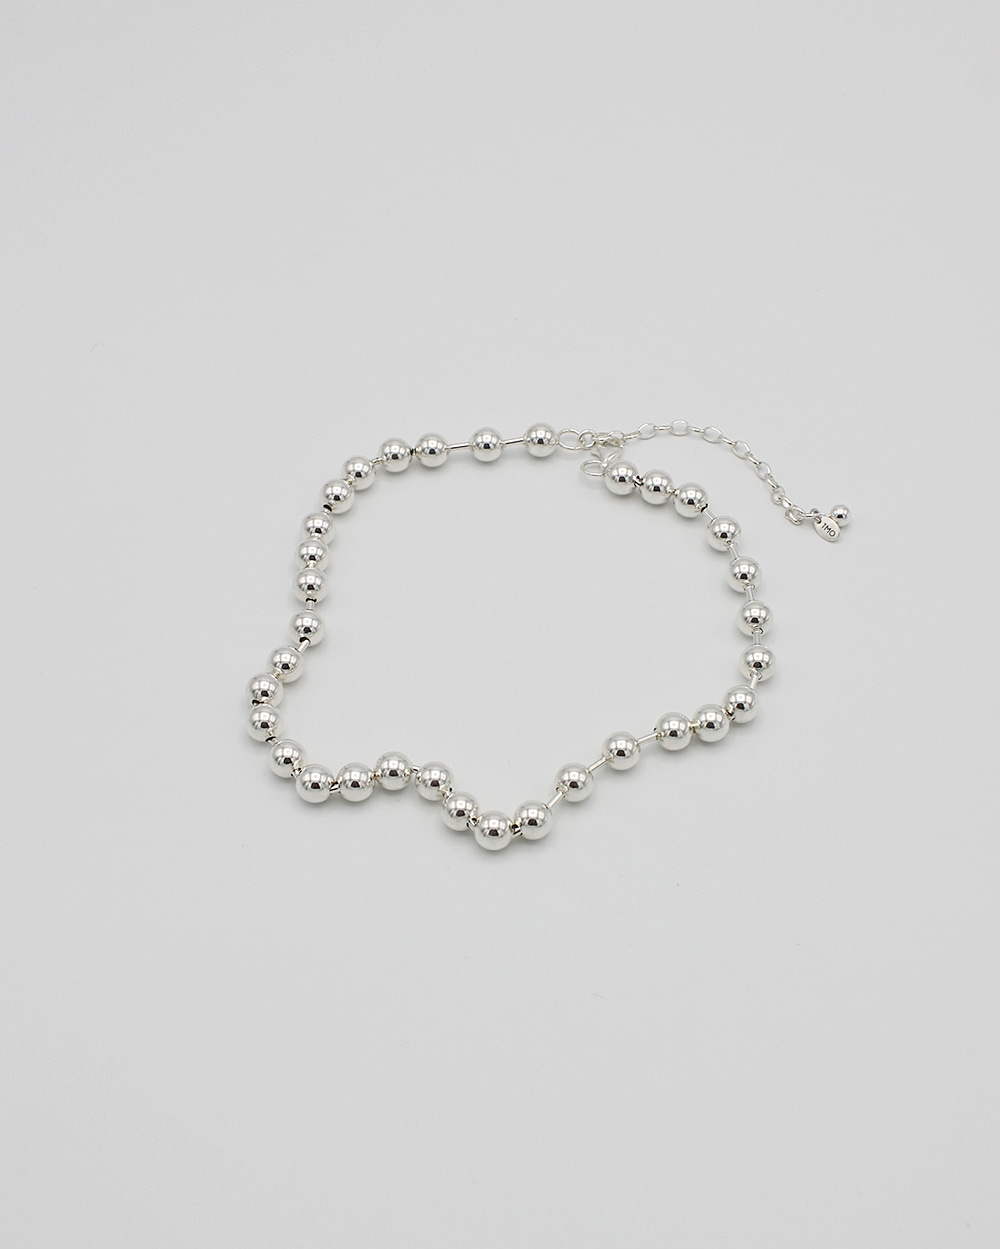 8mm BALL CHAIN NECKLACE - SILVER